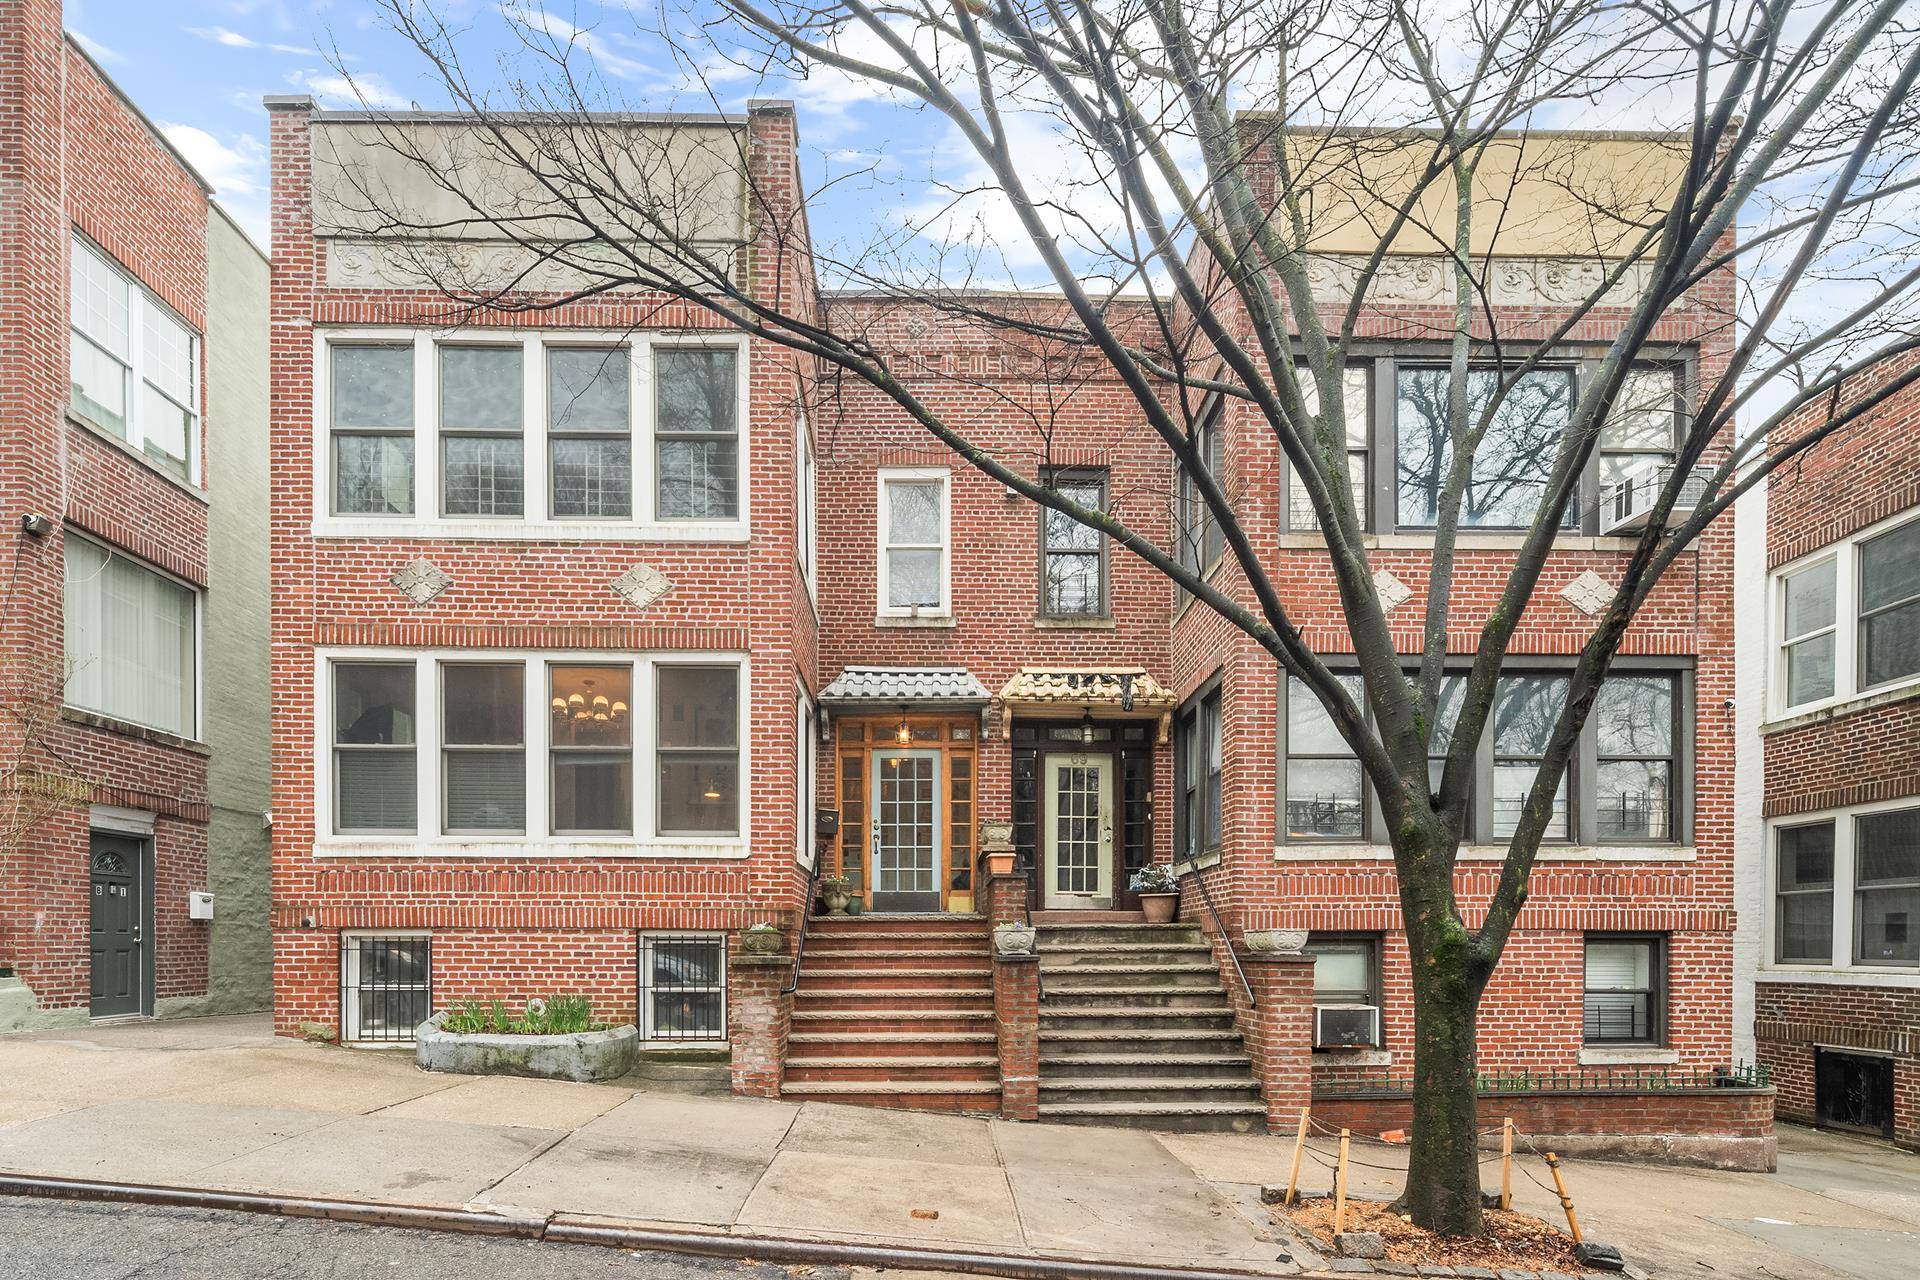 71 Payson Avenue is a once in a decade opportunity to own a private home with a generous footprint in Manhattan.